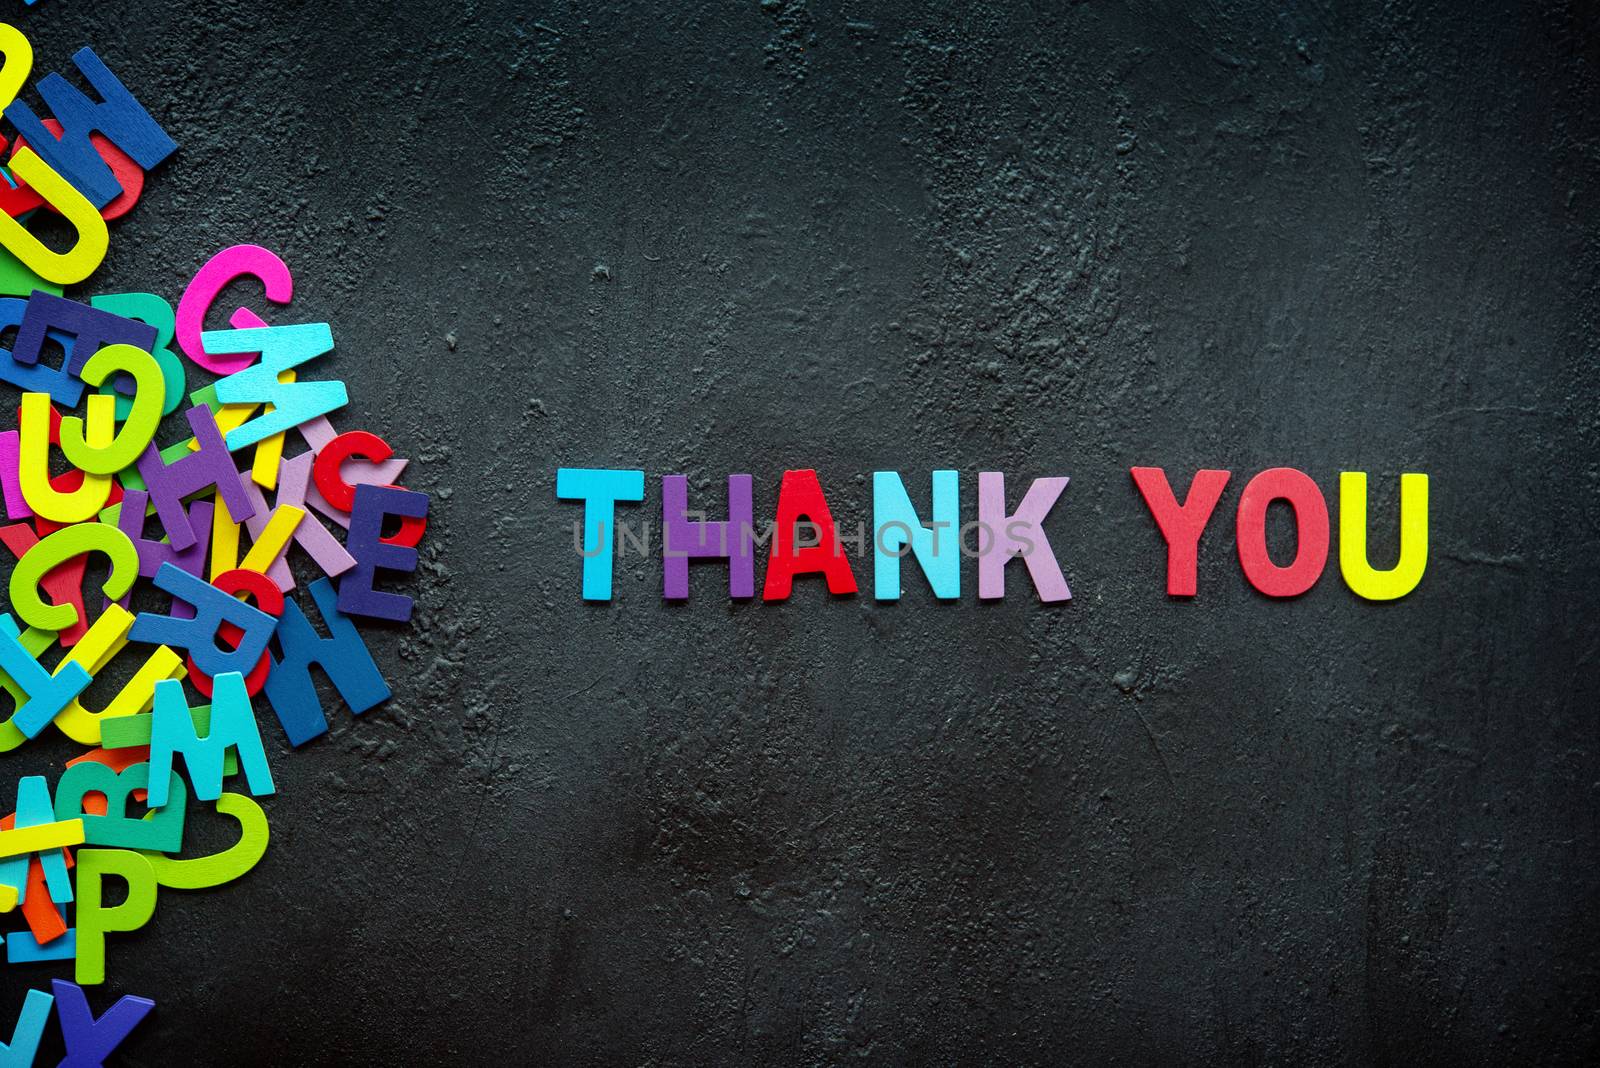 The colorful words "THANK YOU" made with wooden letters next to a pile of other letters over dark background.